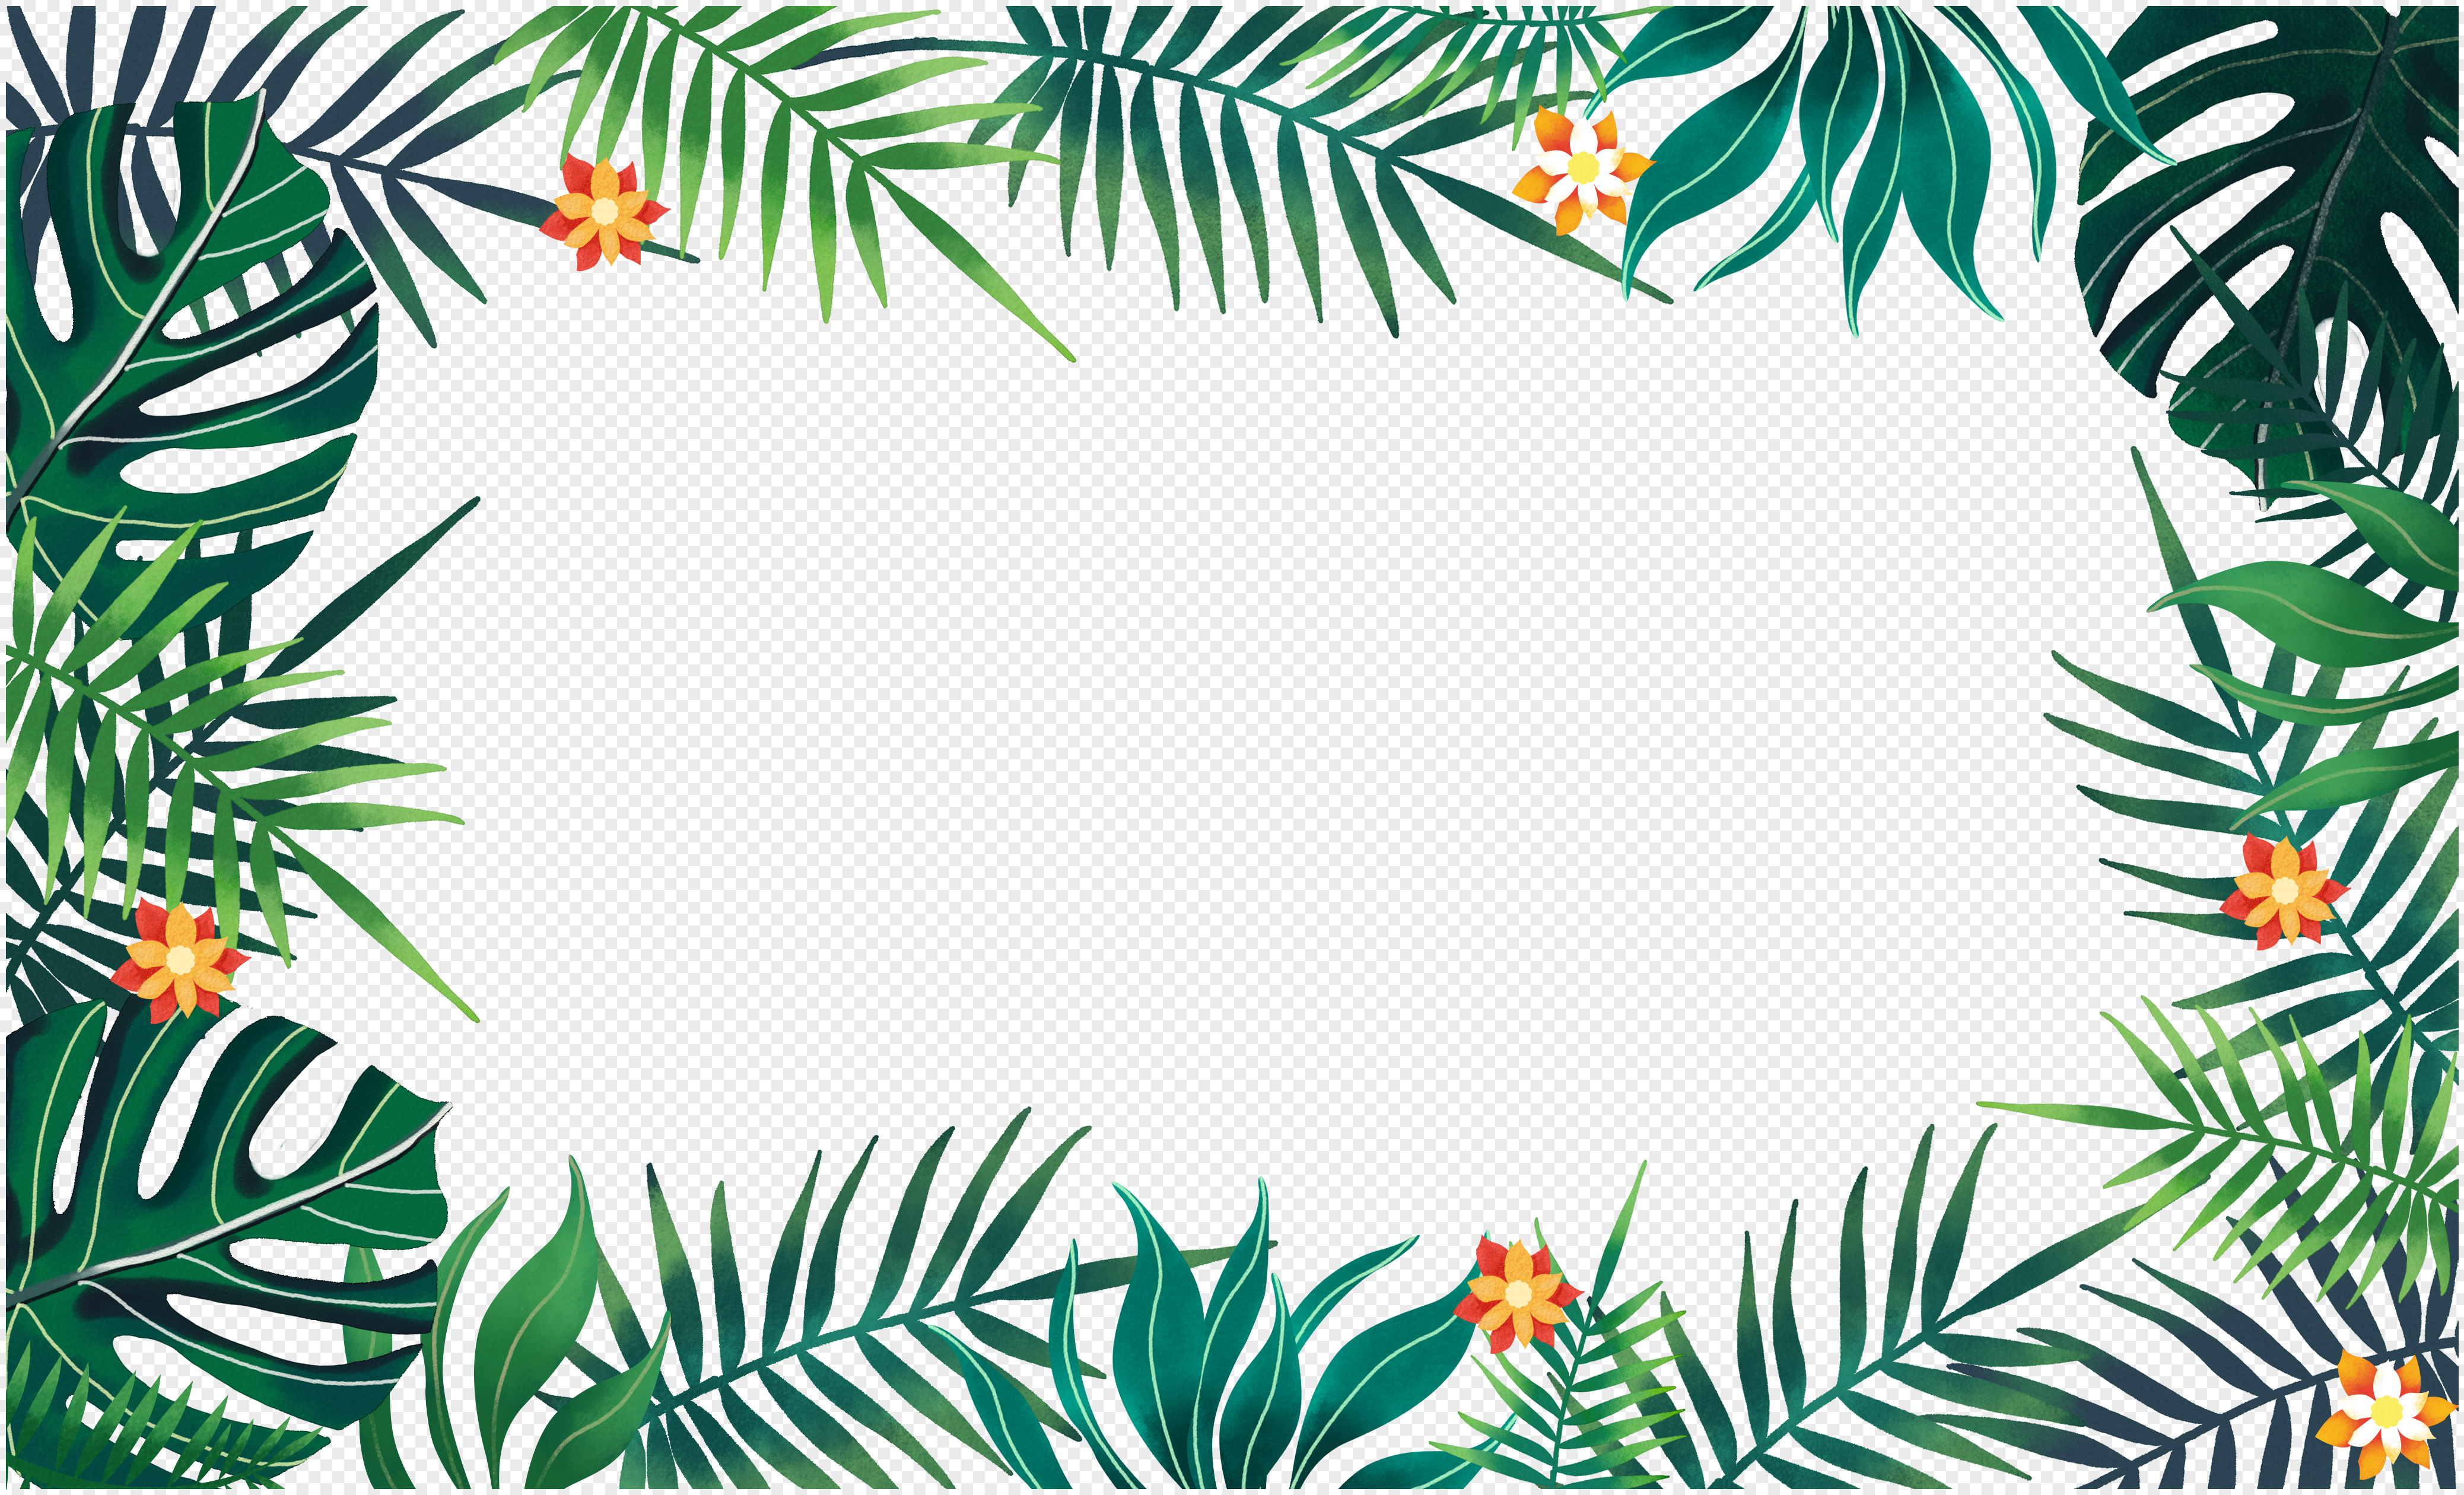 Tropical Plant Flower Border PNG Image & PSD File Free Download